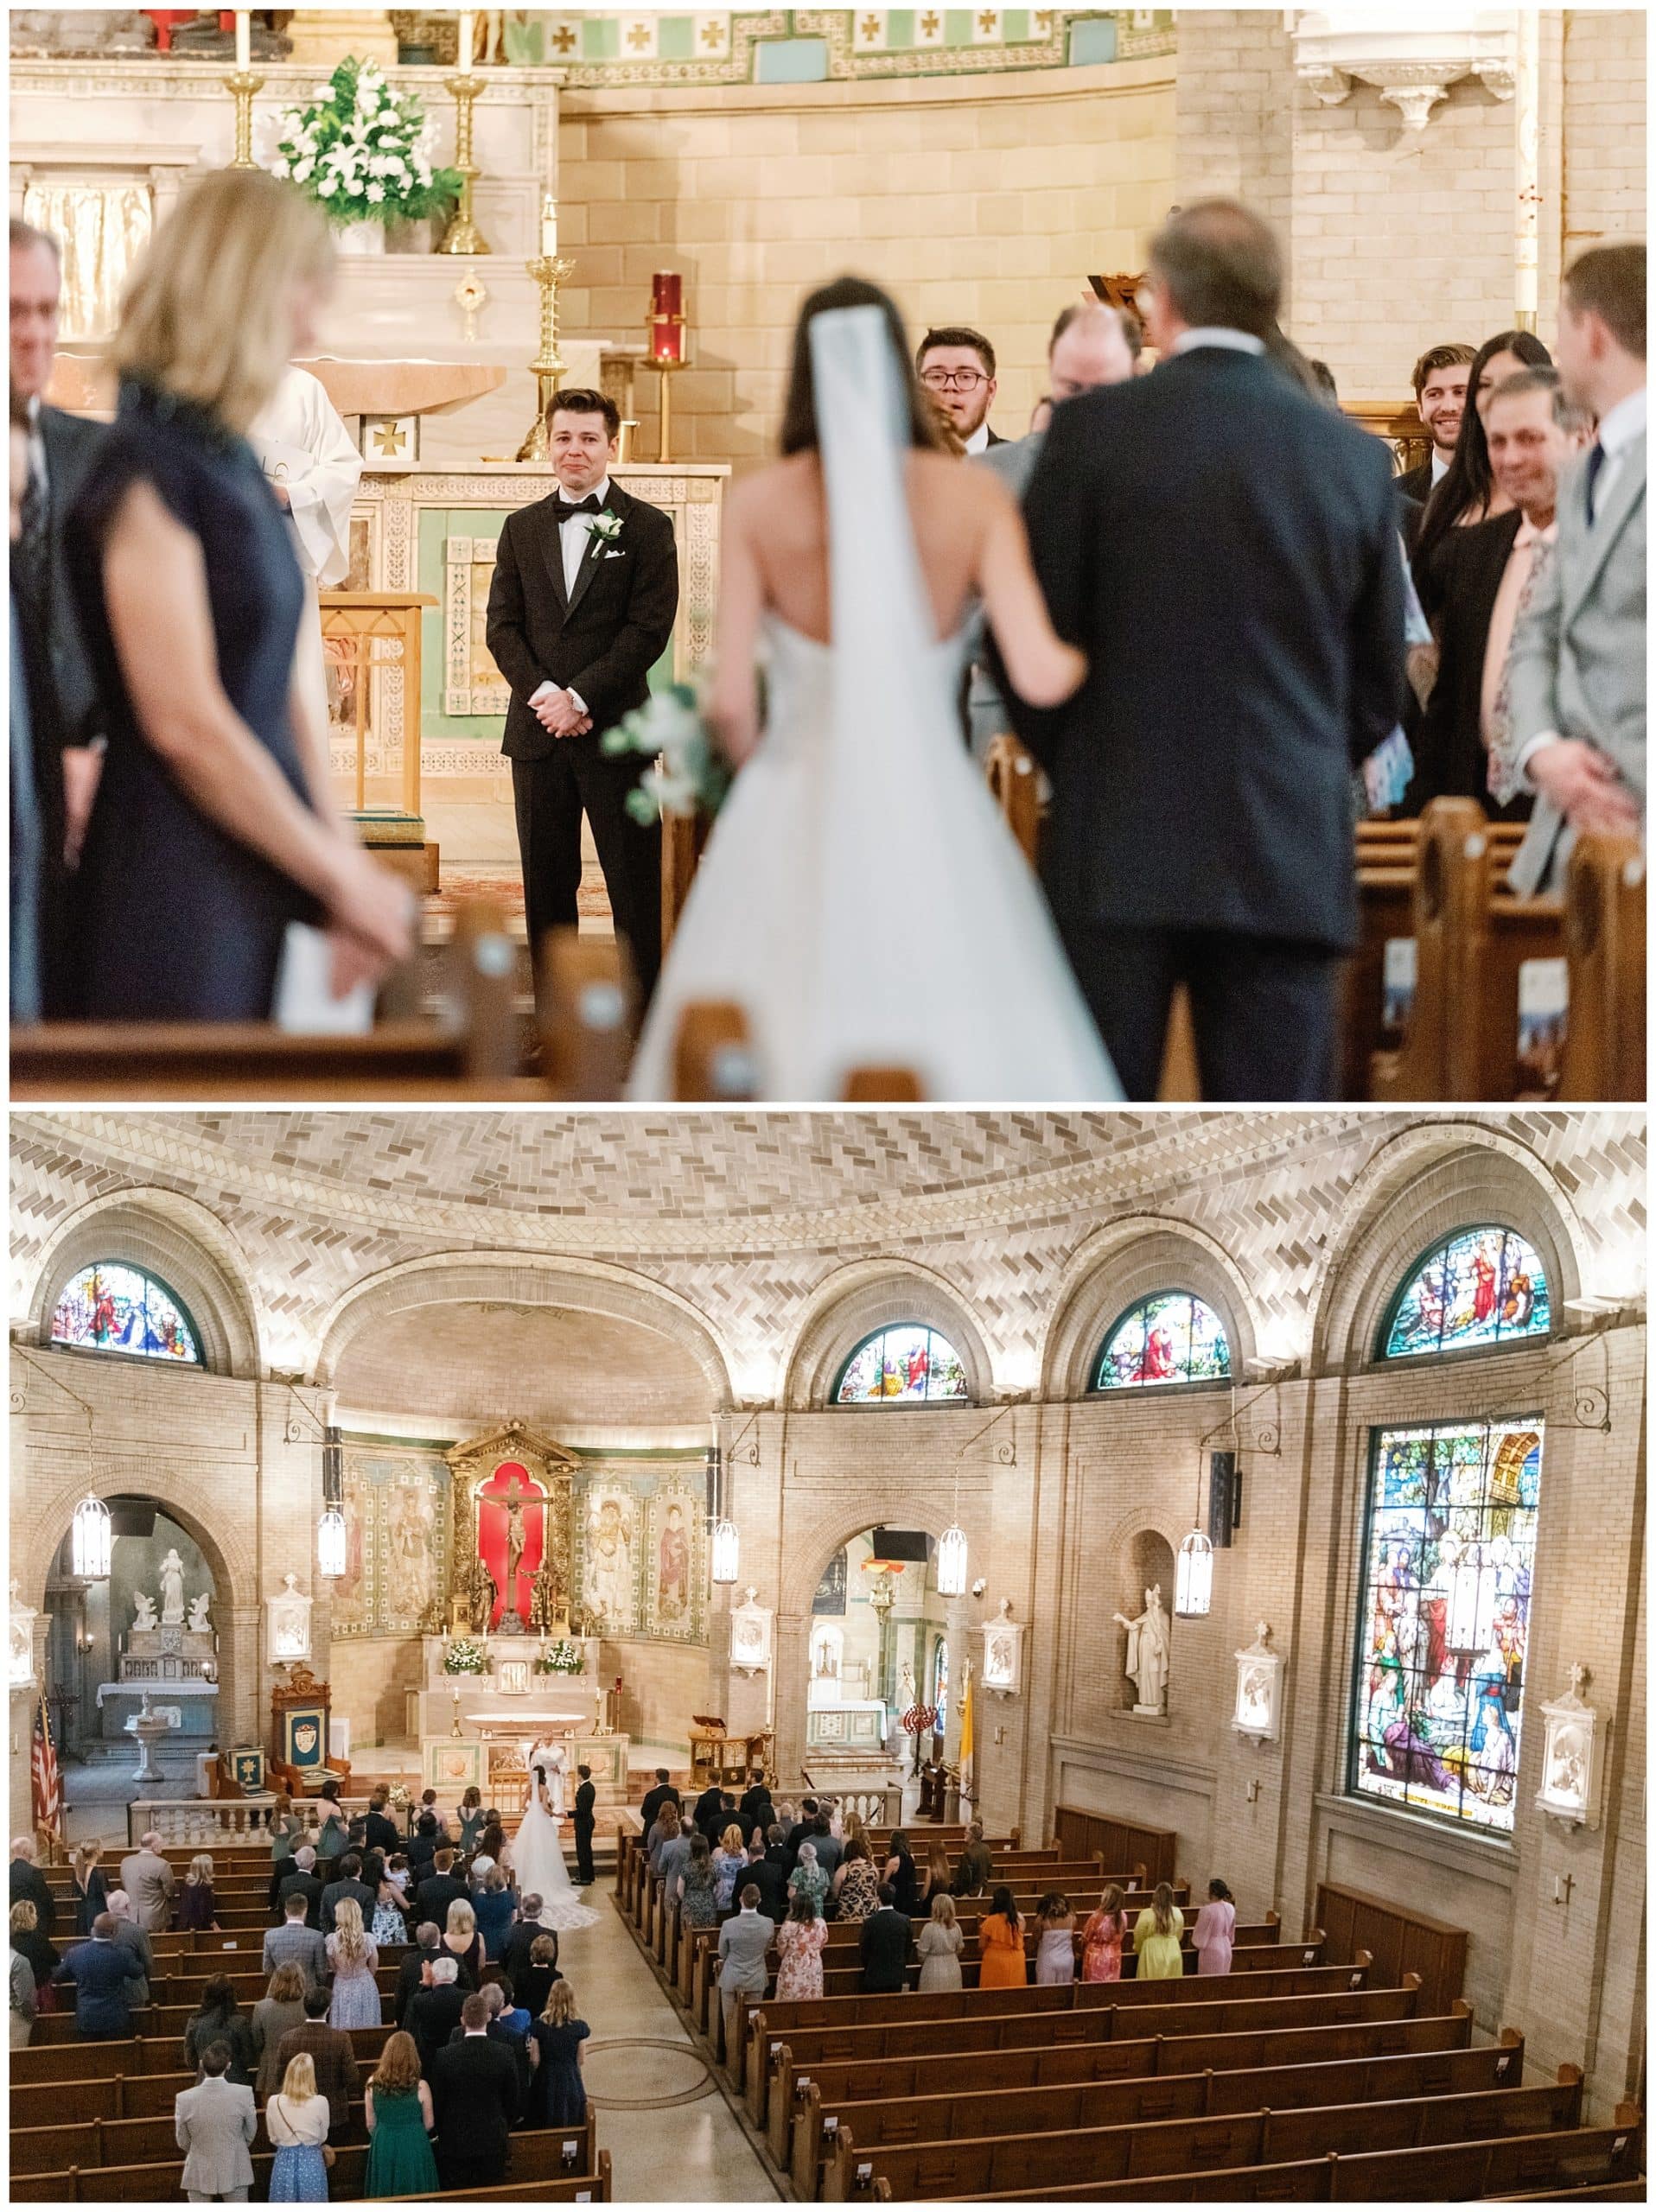 groom is emotion as bride walks down the aisle at Basilica of st Lawrence wedding